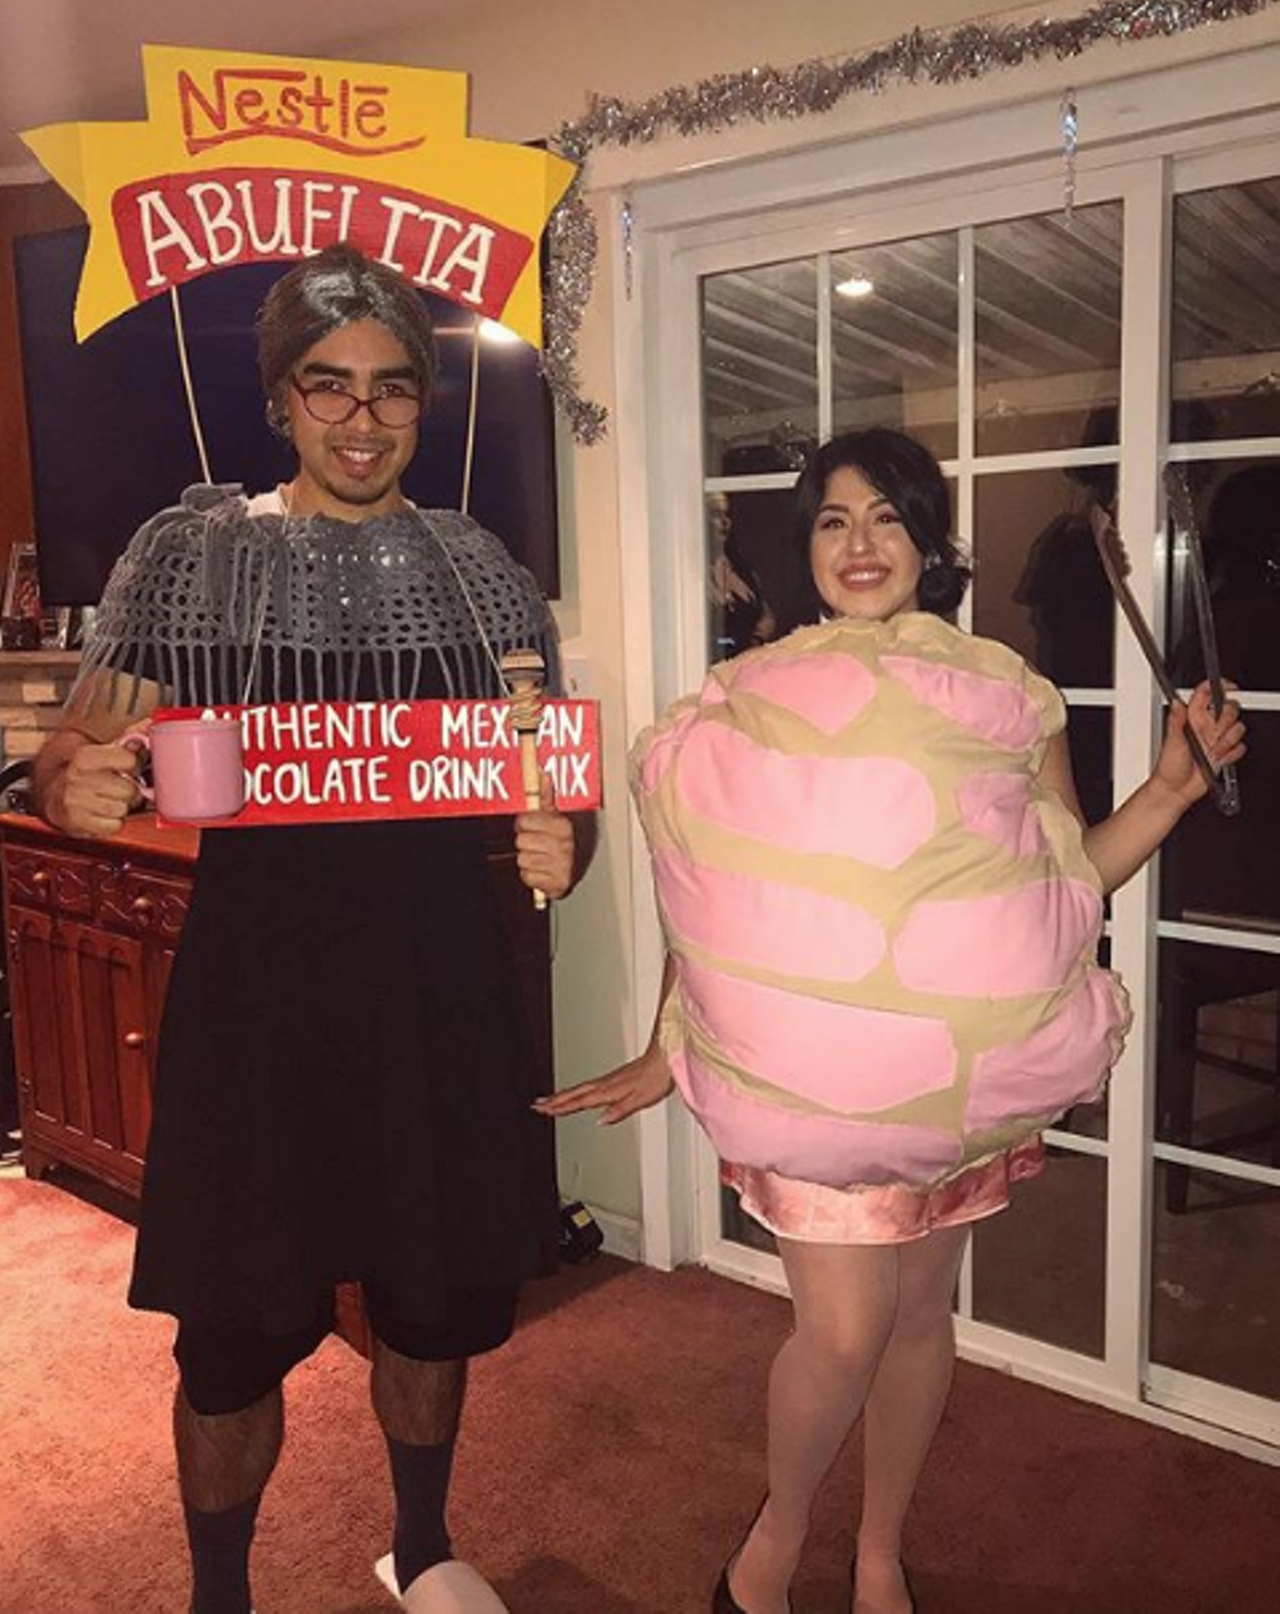 Pan Dulce
Dress up as your favorite sugary pastry from the neighborhood bakery. A cocha makes a great choice, but don't limit yourself. Make it a couples costume by having your partner go as a cup of Mexican hot chocolate or a package of Nestle Abuelita mix. 
Photo via Instagram / artofzyanya